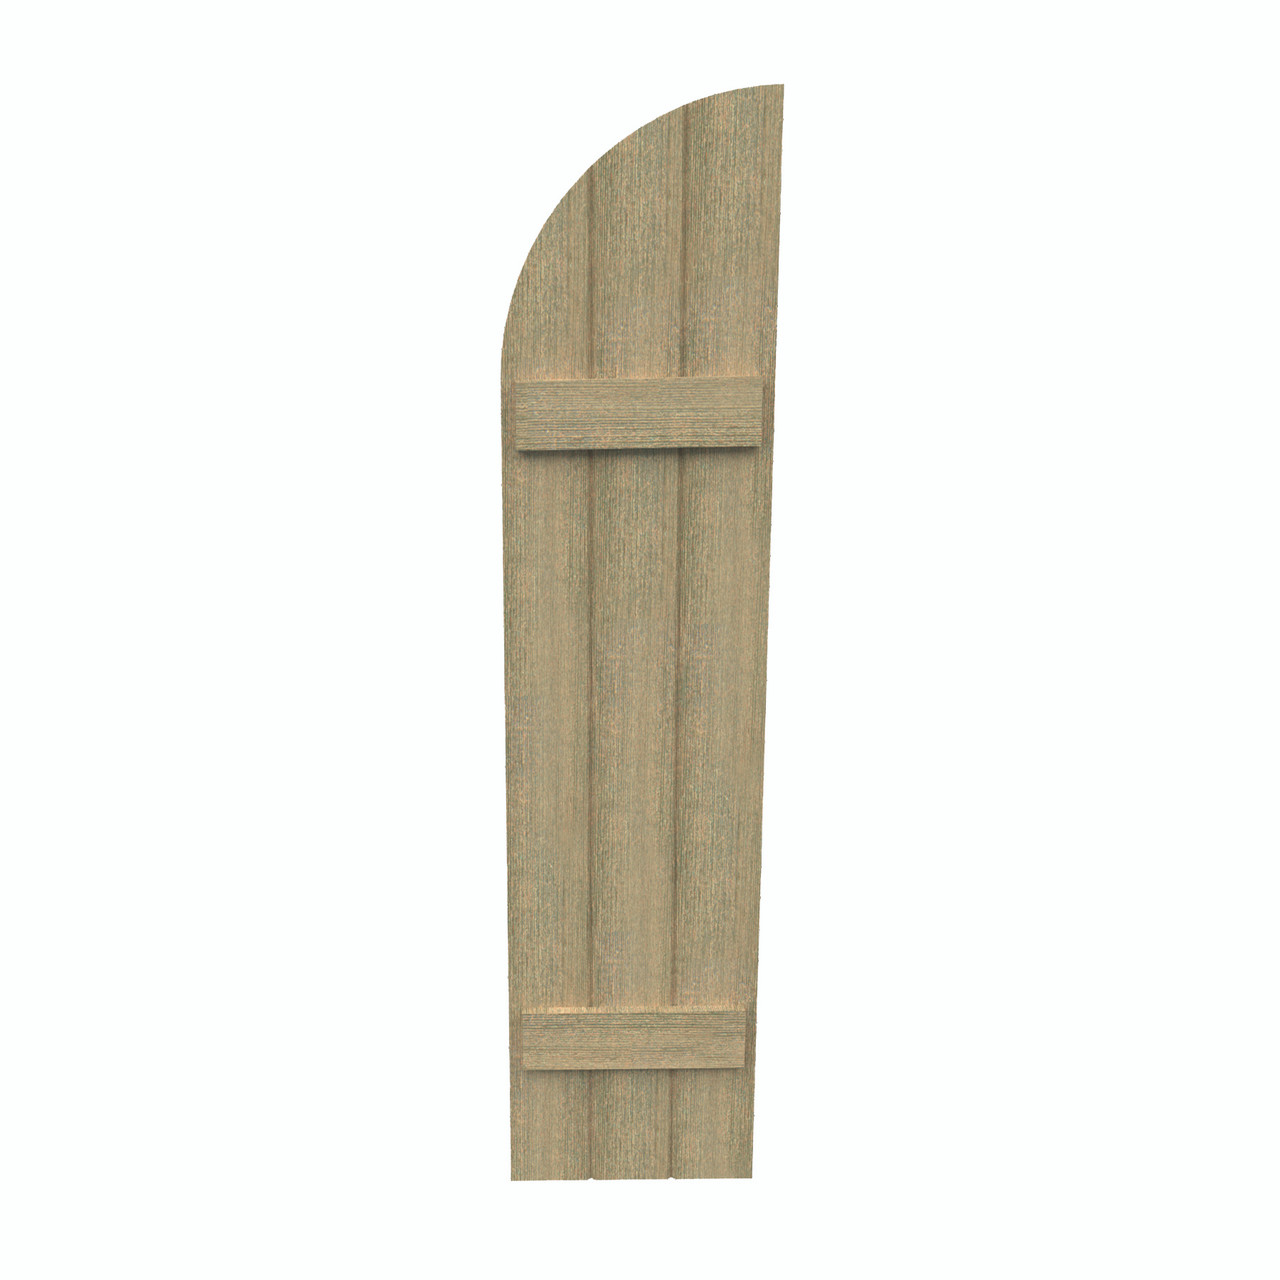 18 inch by 74 inch Quarter Round Shutter with 3-Boards